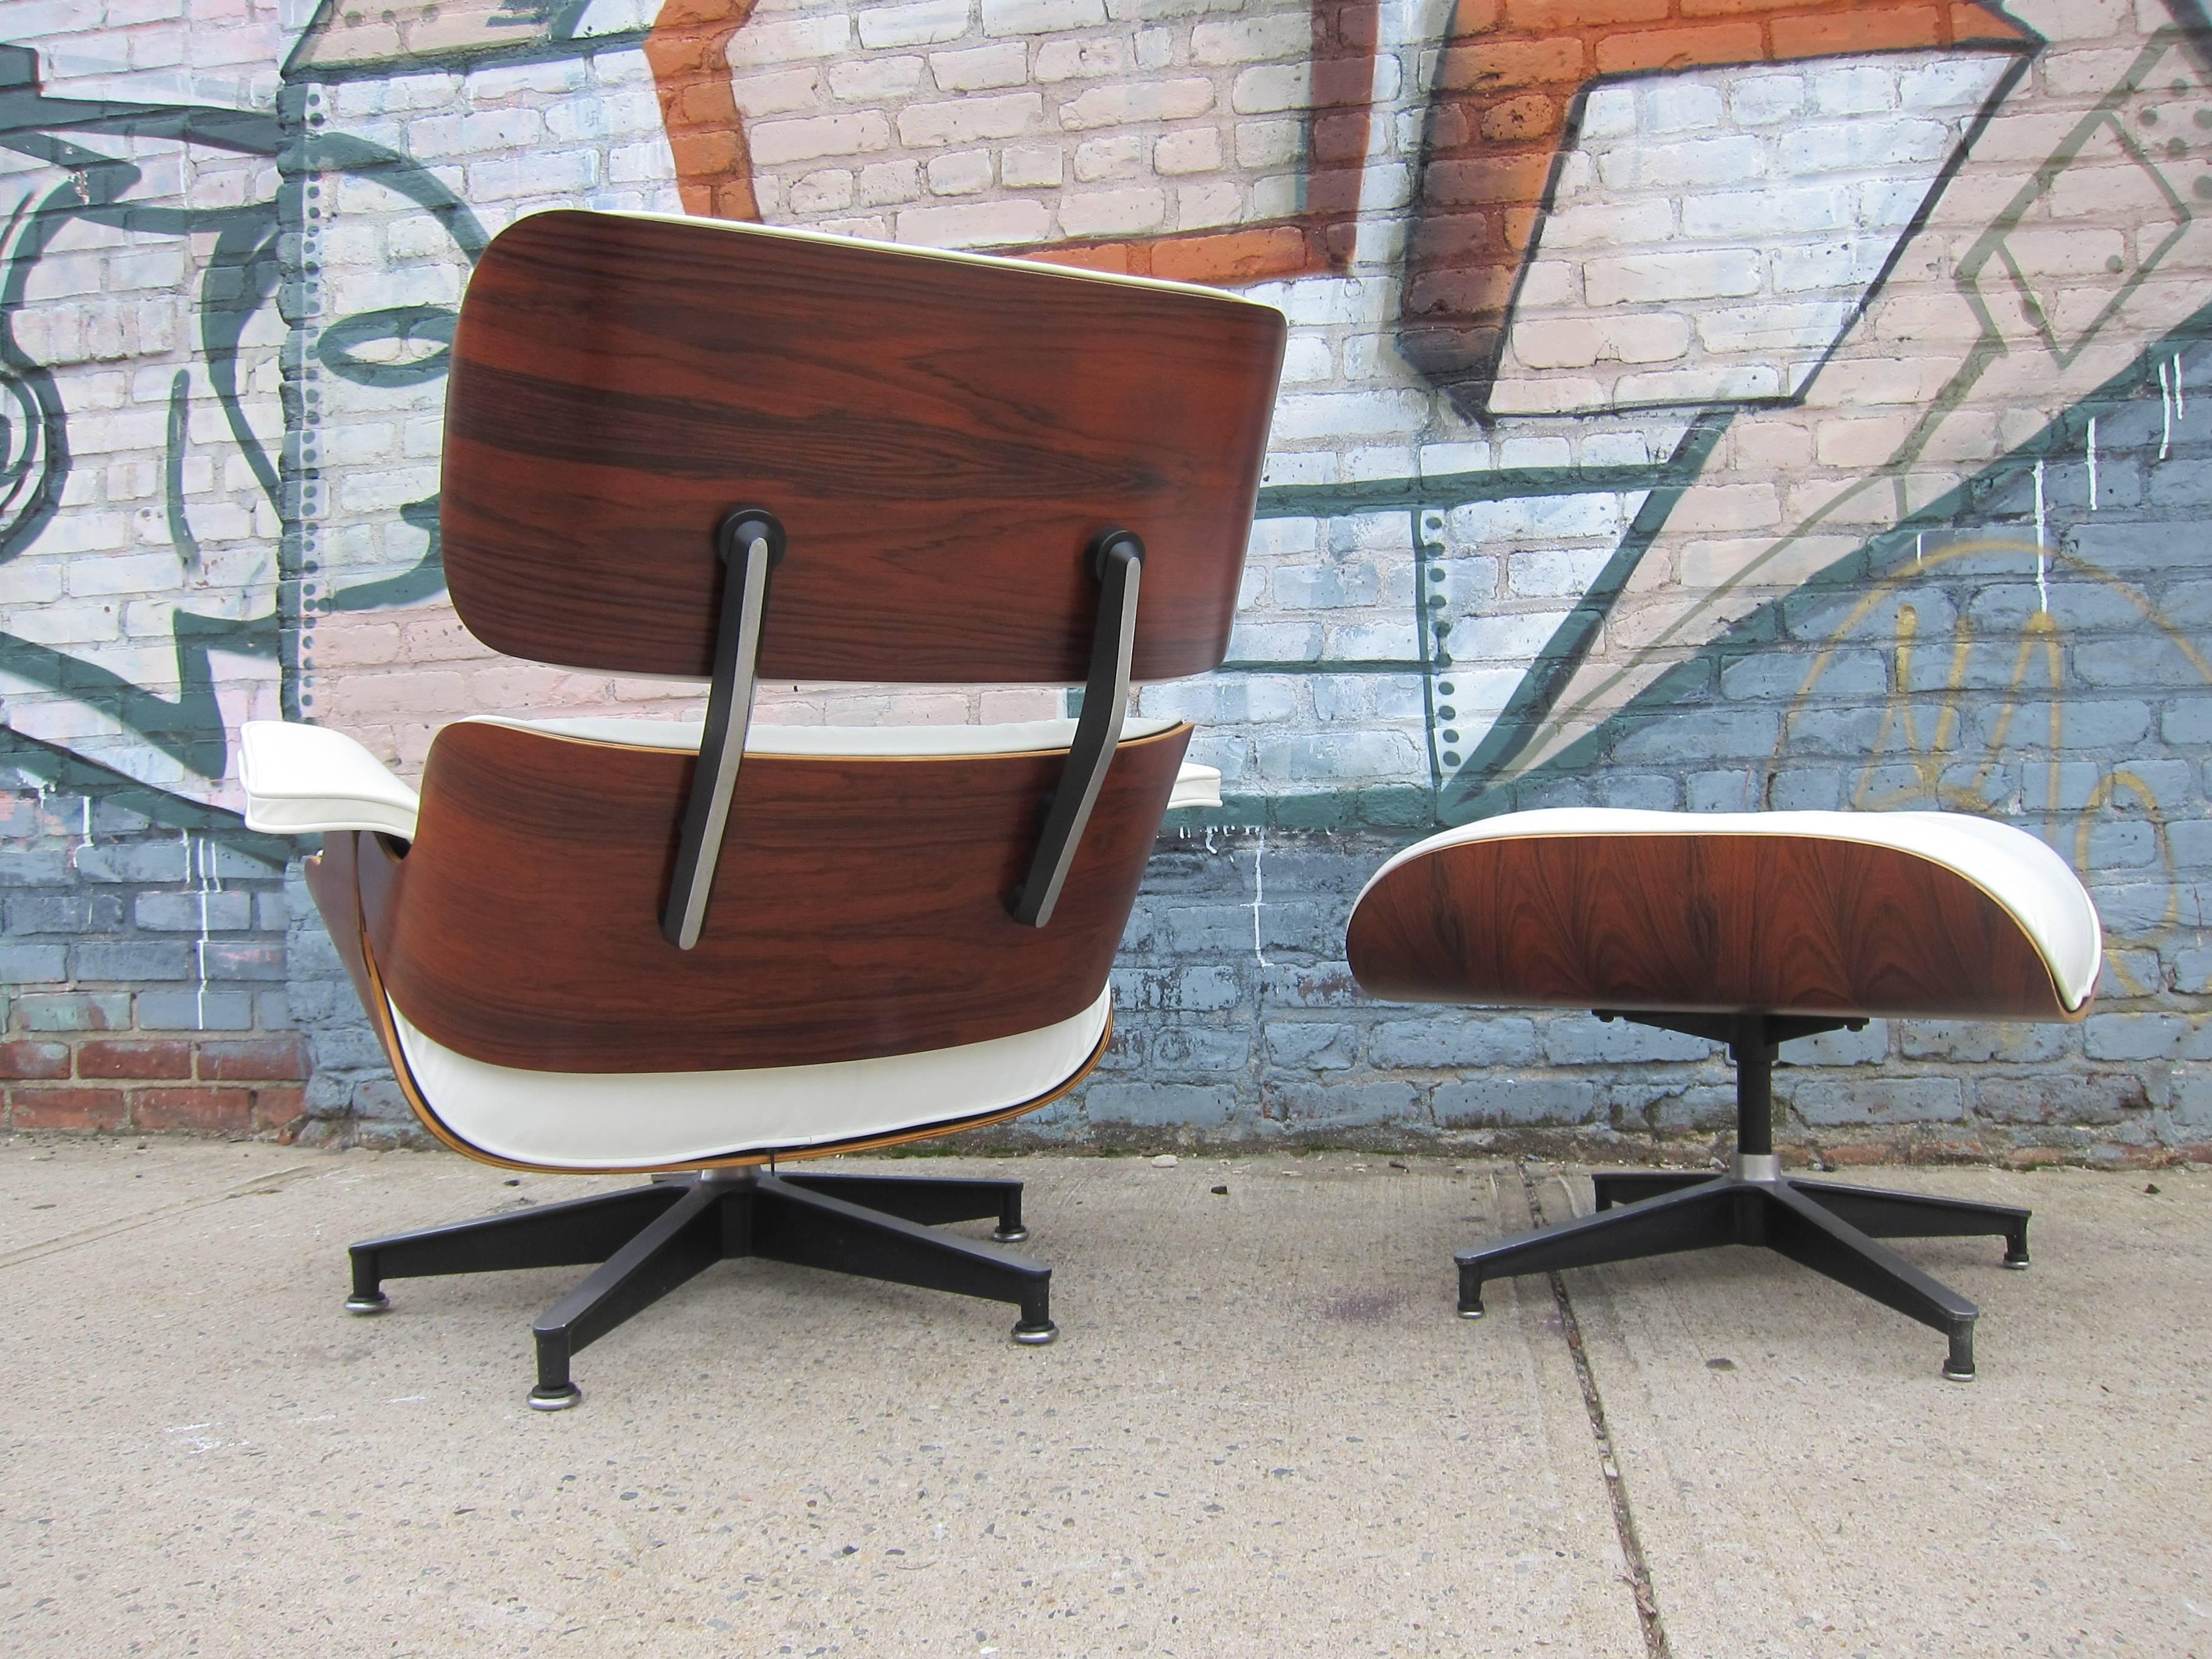 Herman Miller Eames lounge chair and ottoman. Features vintage rosewood shells that have been professionally restored along with perfect new custom-made cushions with white leather. Signed Herman Miller. The wood those deep and rich colors and